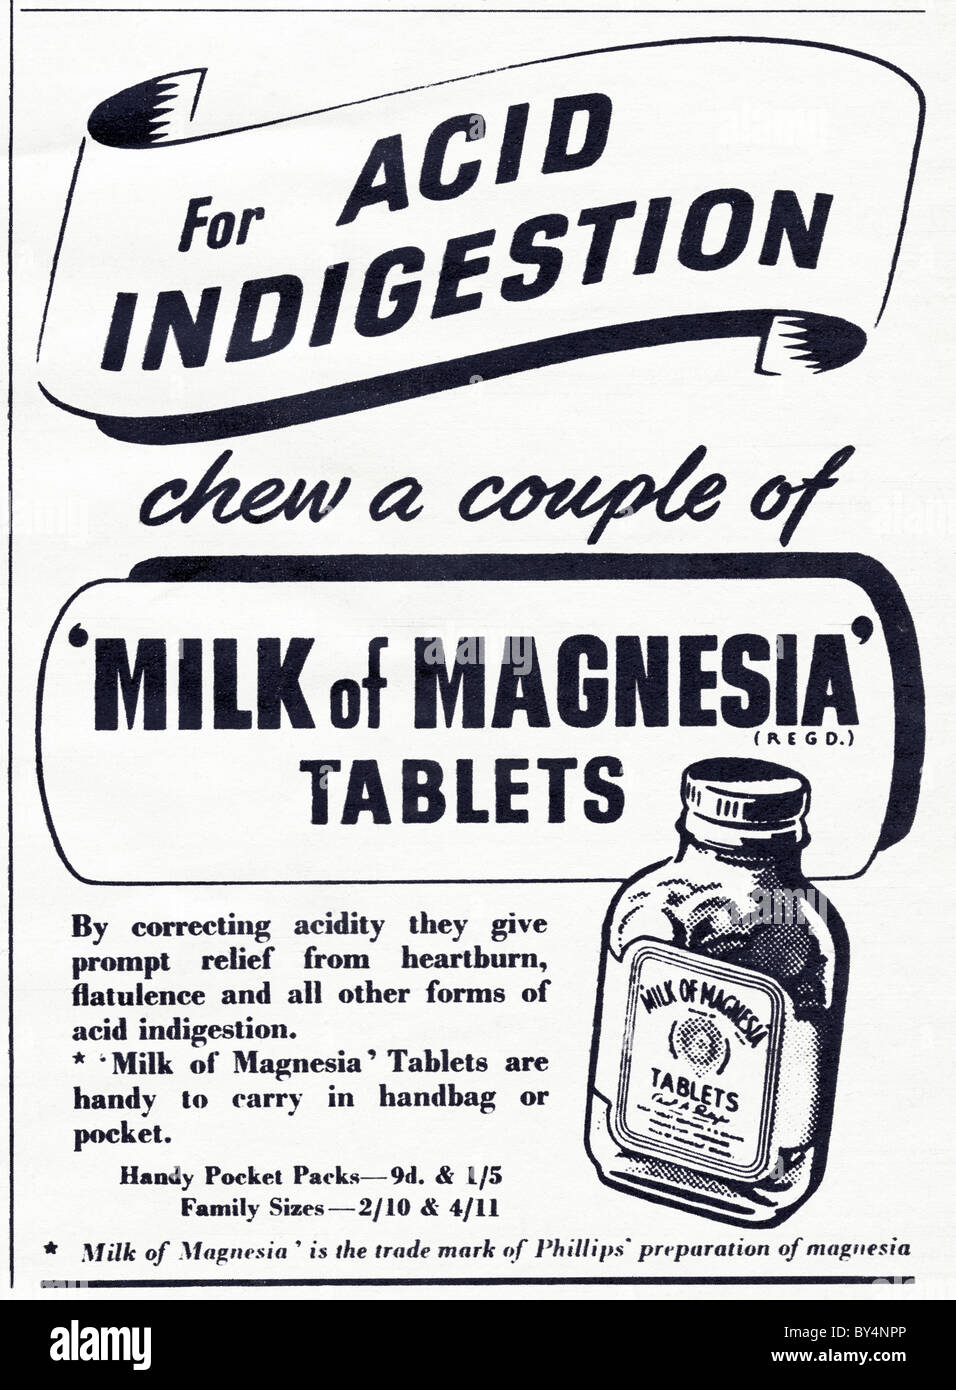 1950s advertisement for Milk of Magnesia tablets for acid indigestion Stock Photo